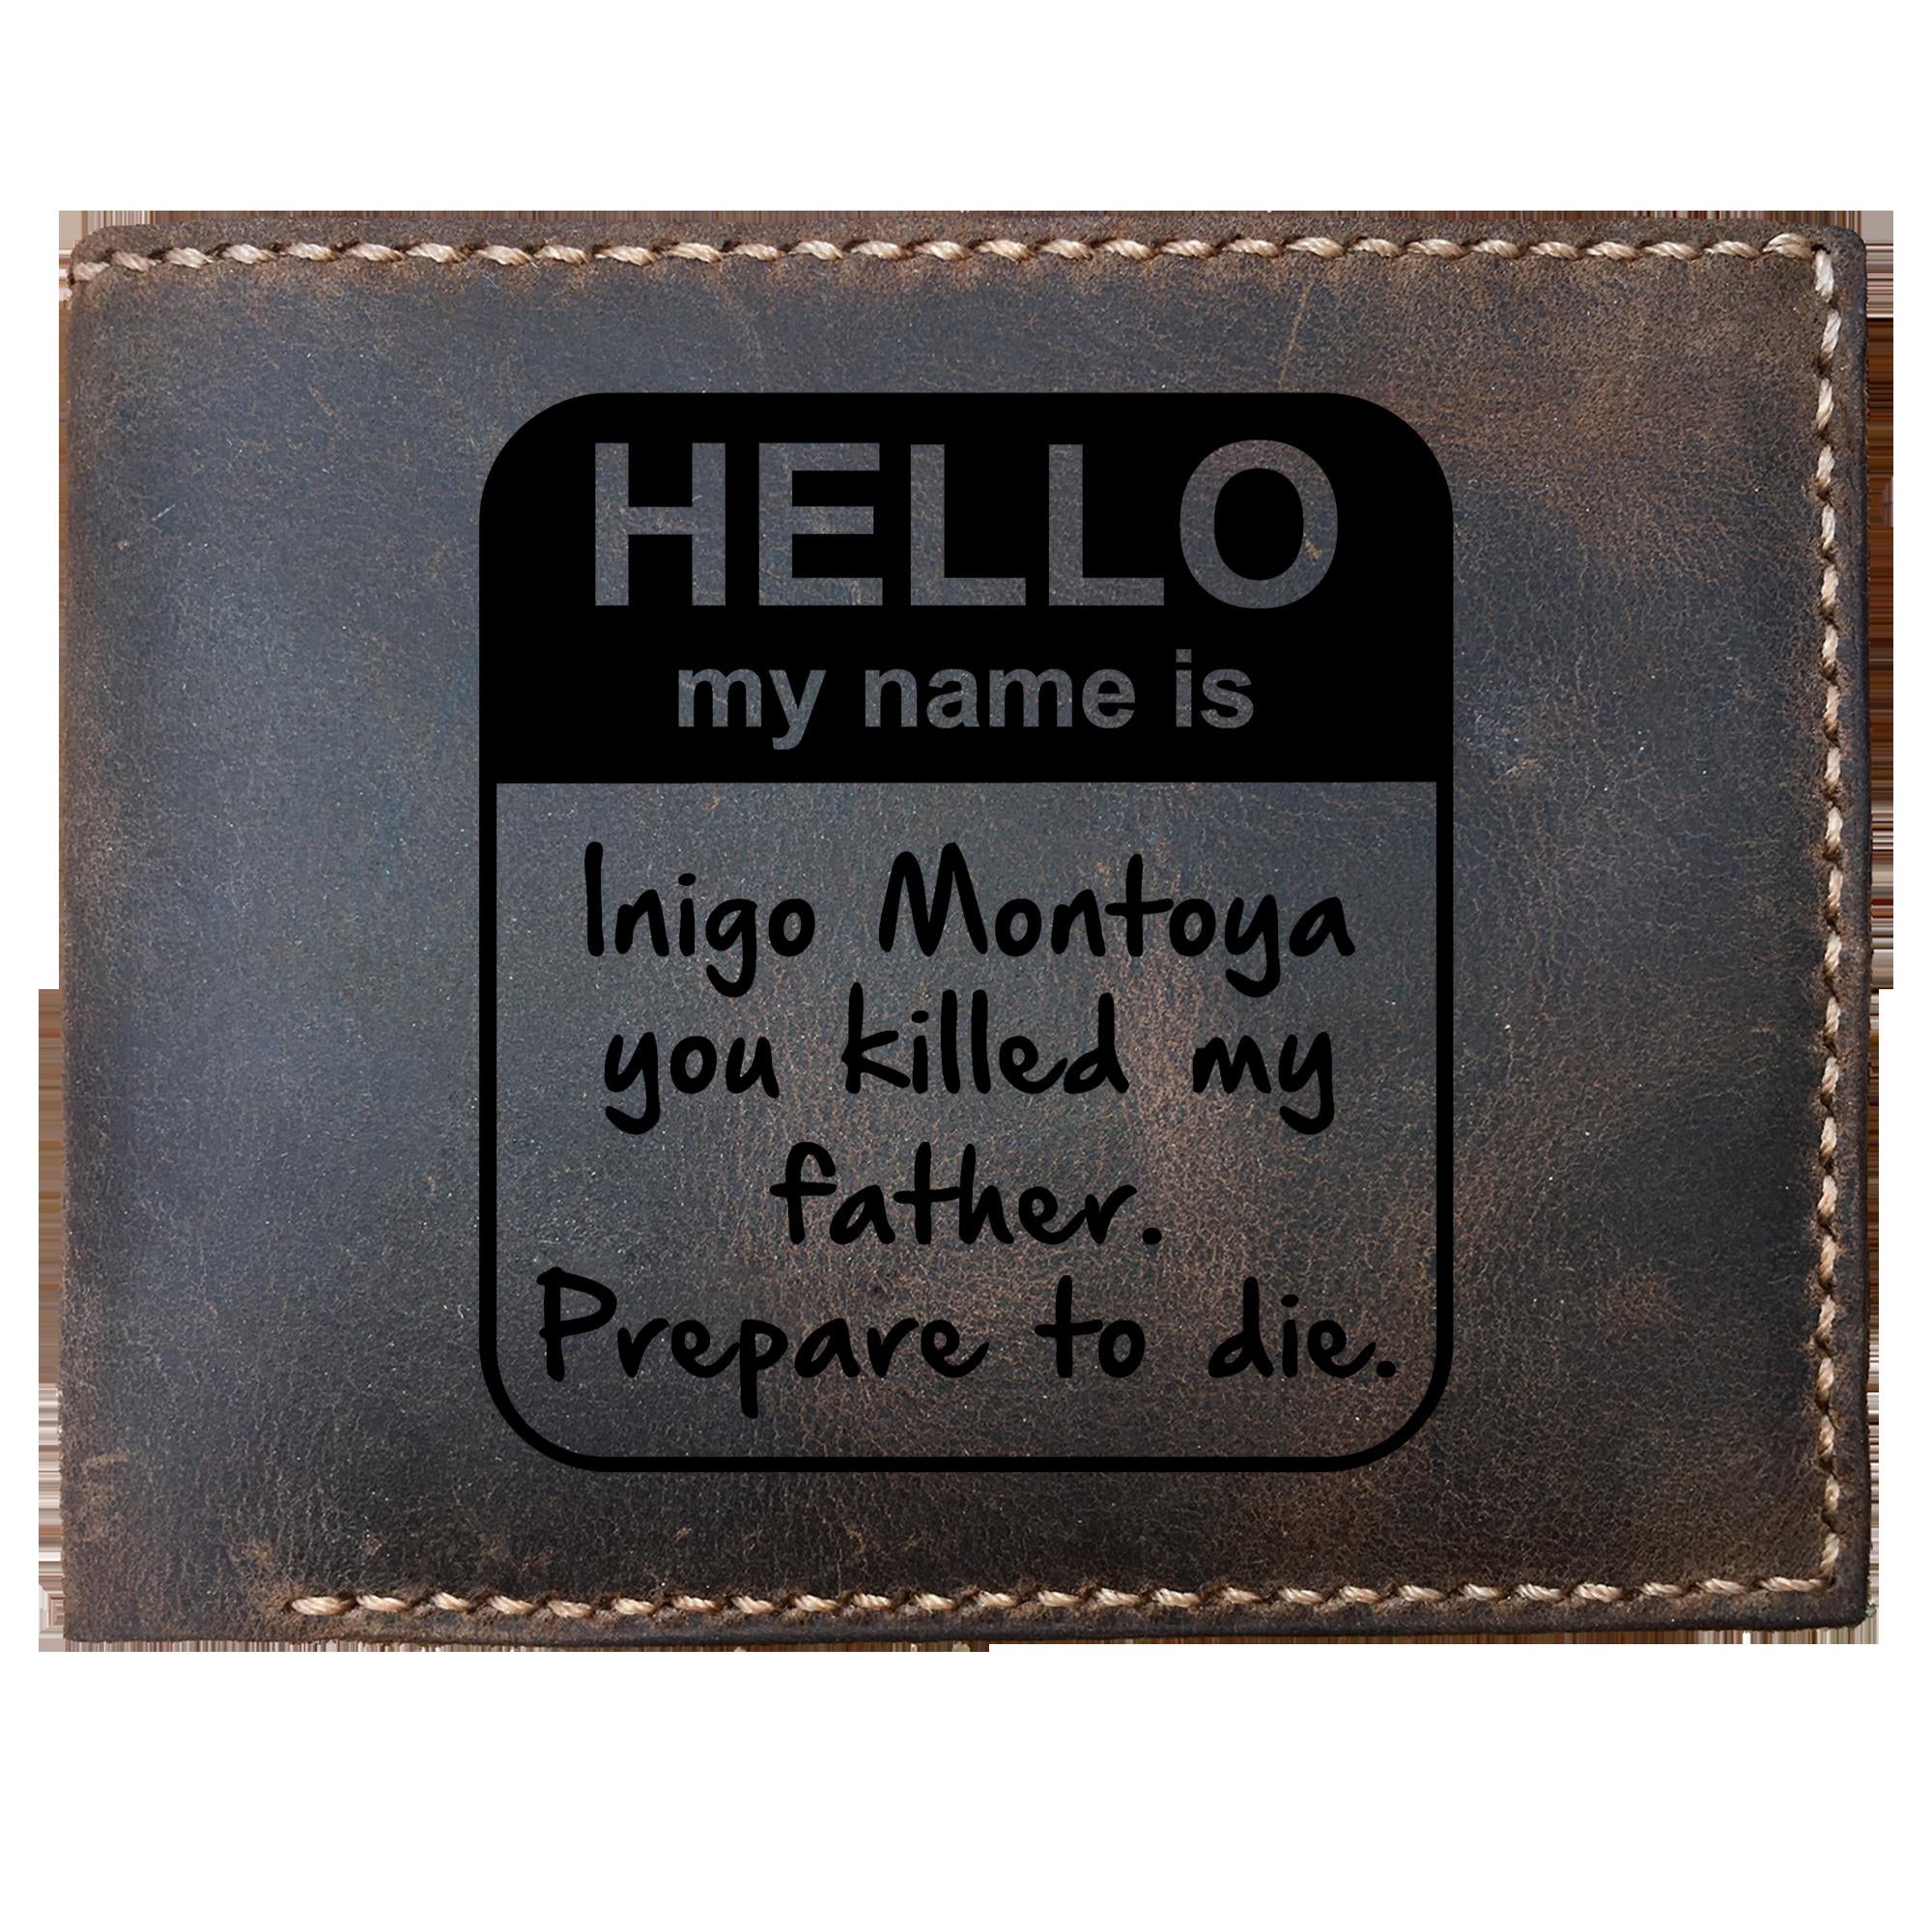 Skitongifts Funny Custom Laser Engraved Bifold Leather Wallet For Men, My Name Is Inigo Montoya You Killed My Father Prepare To Die You